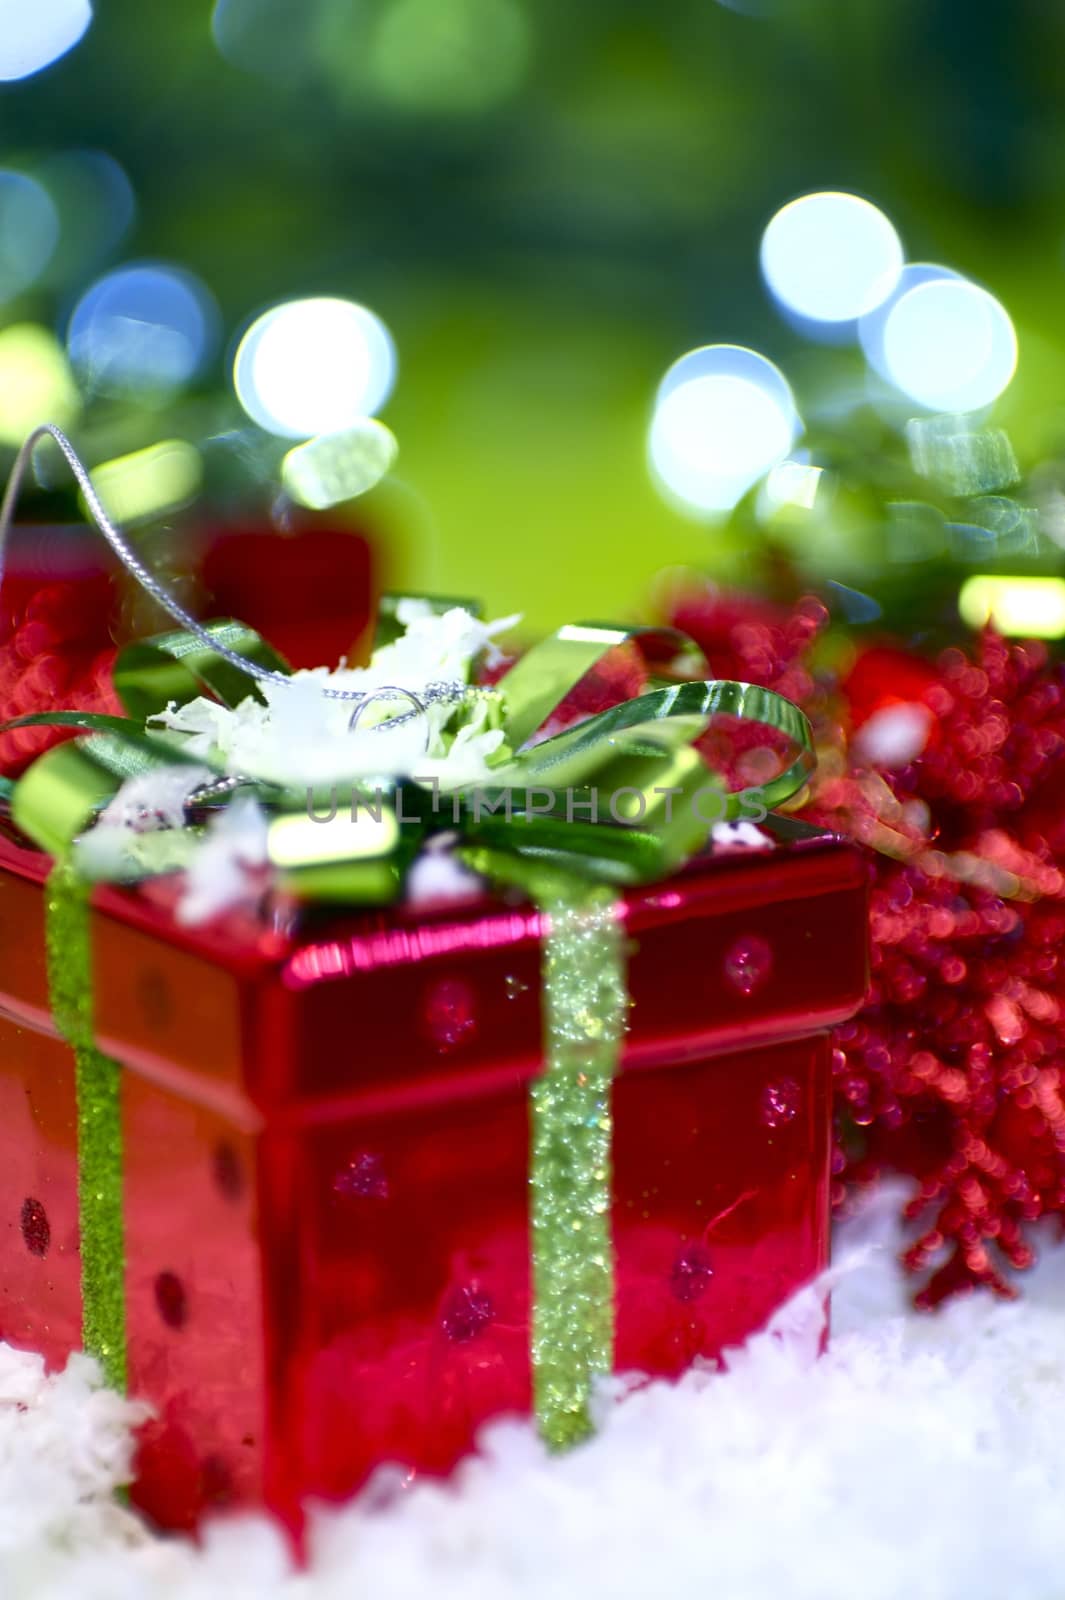 Presents Sharing Holiday Photo Theme. Small Red Christmas Boxes with Green Bows. Cool Green Bokeh and Fake Snow.